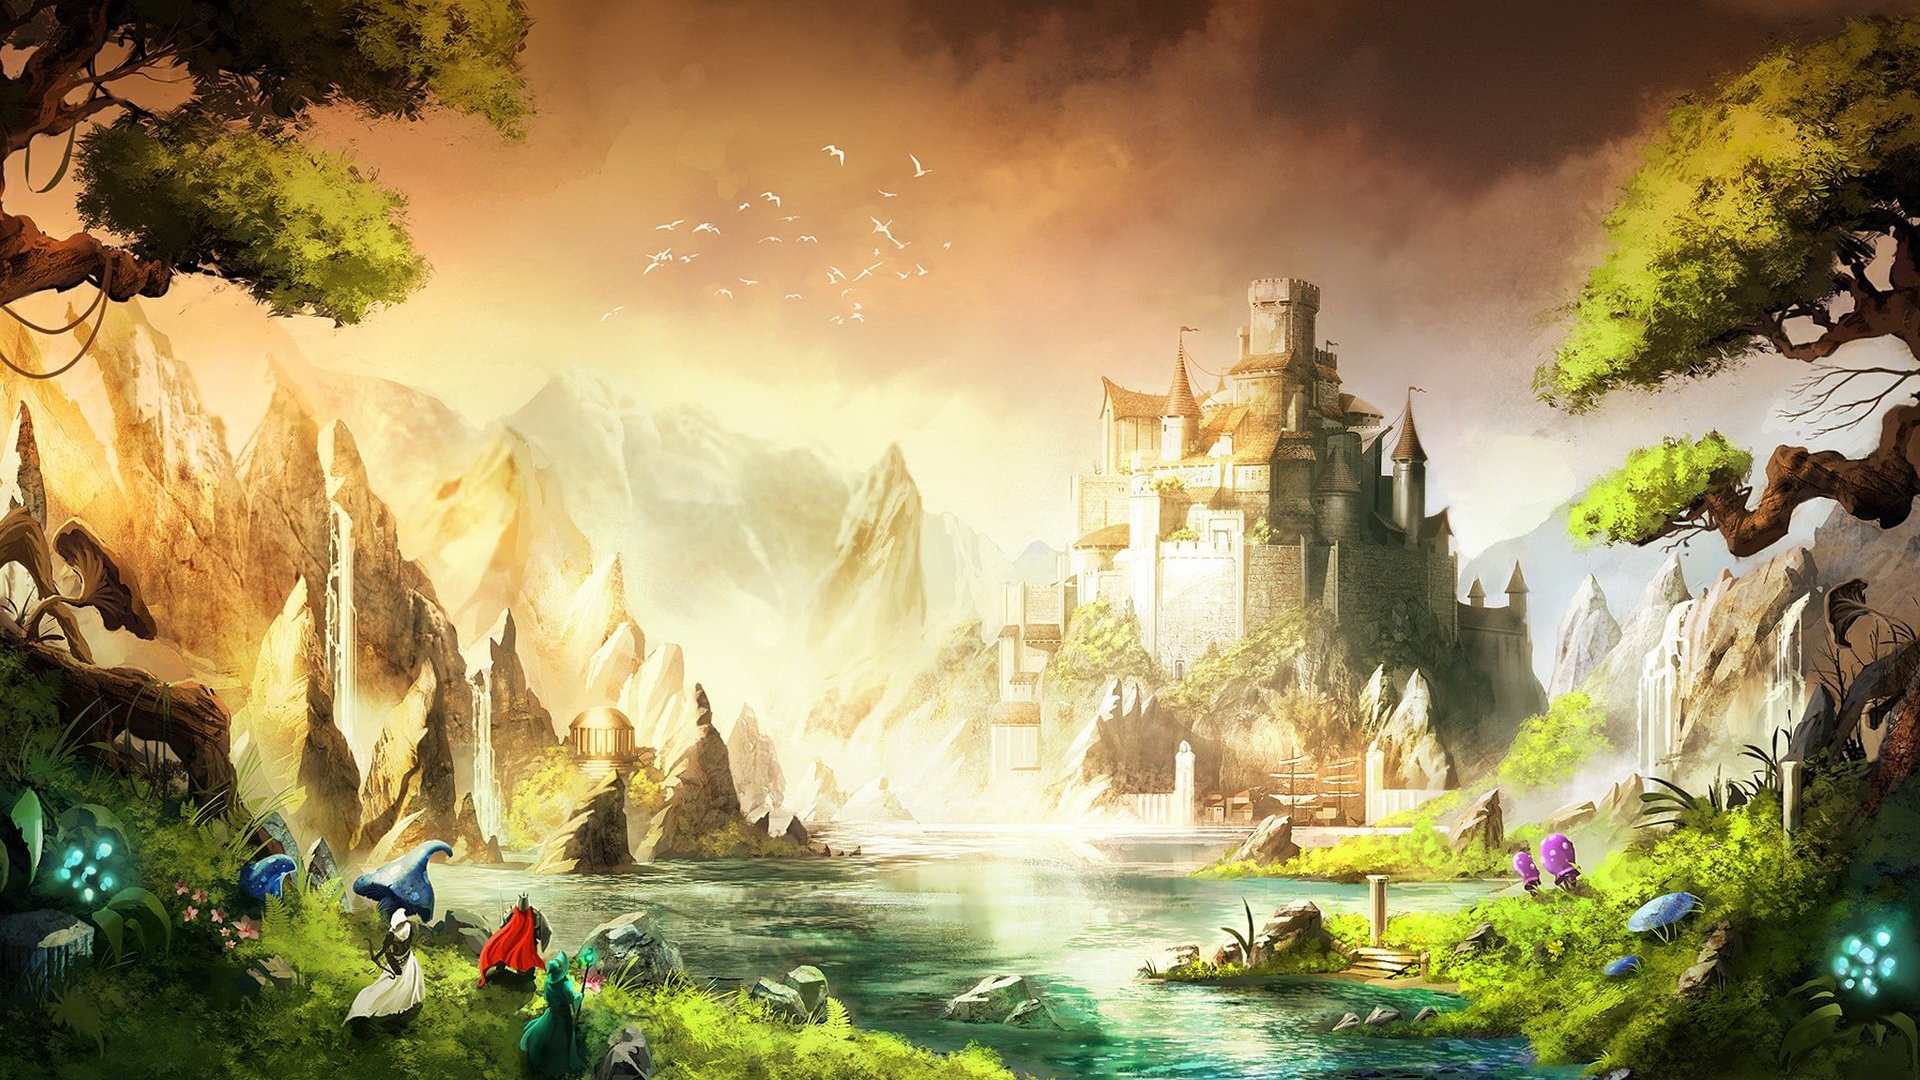 wonderland wallpaper,nature,natural landscape,action adventure game,strategy video game,painting